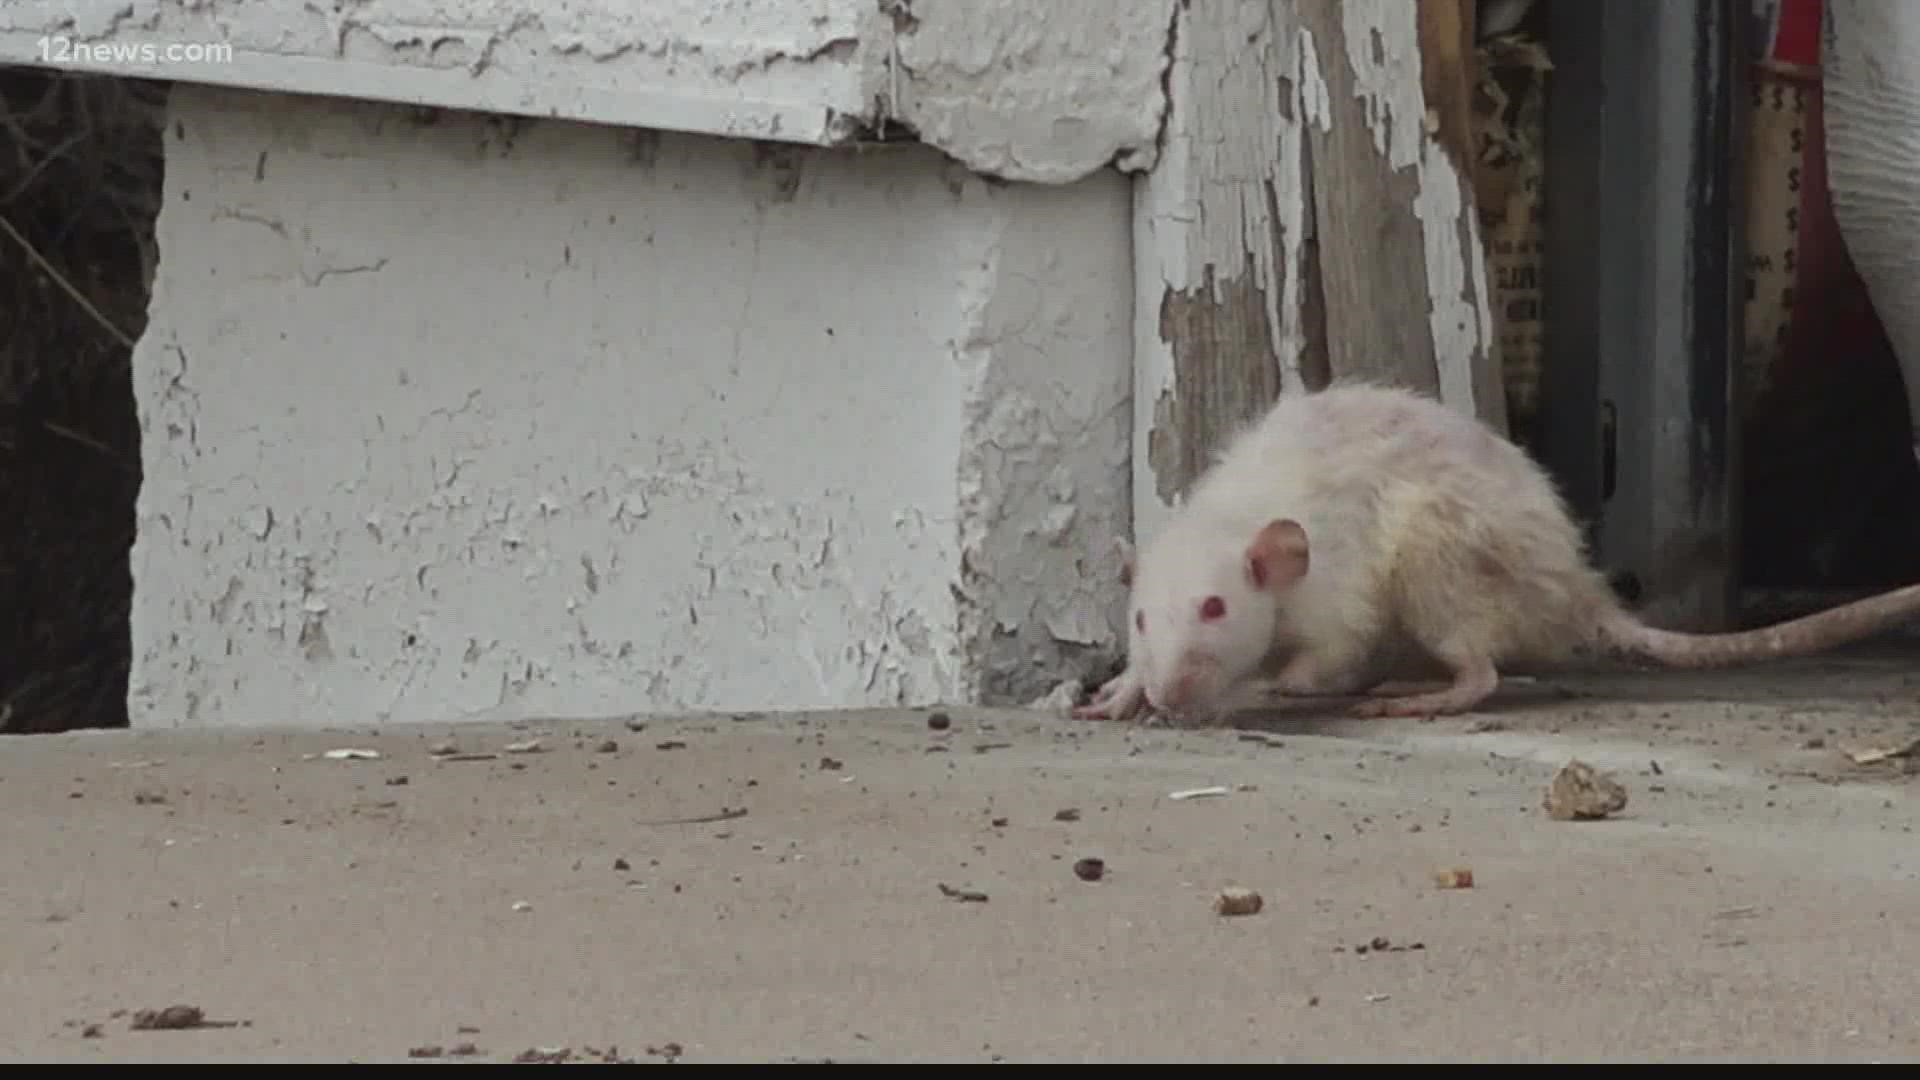 People in a Peoria neighborhood say rats from a nearby house are spreading and finding their way into other homes. Peoria officials say it's a public health hazard.